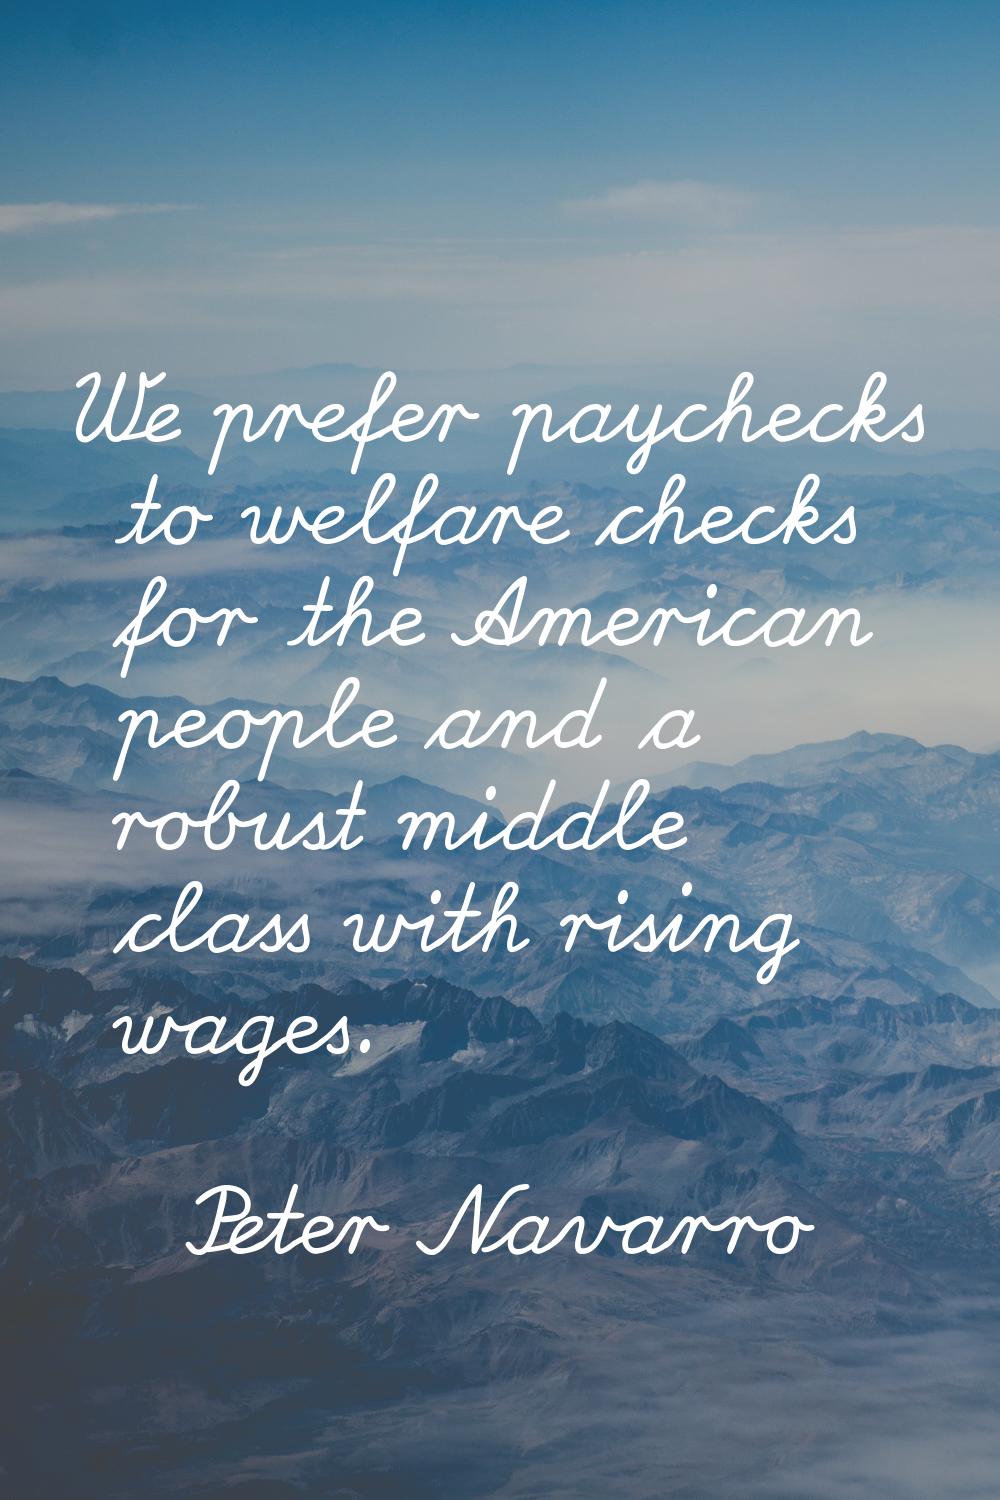 We prefer paychecks to welfare checks for the American people and a robust middle class with rising